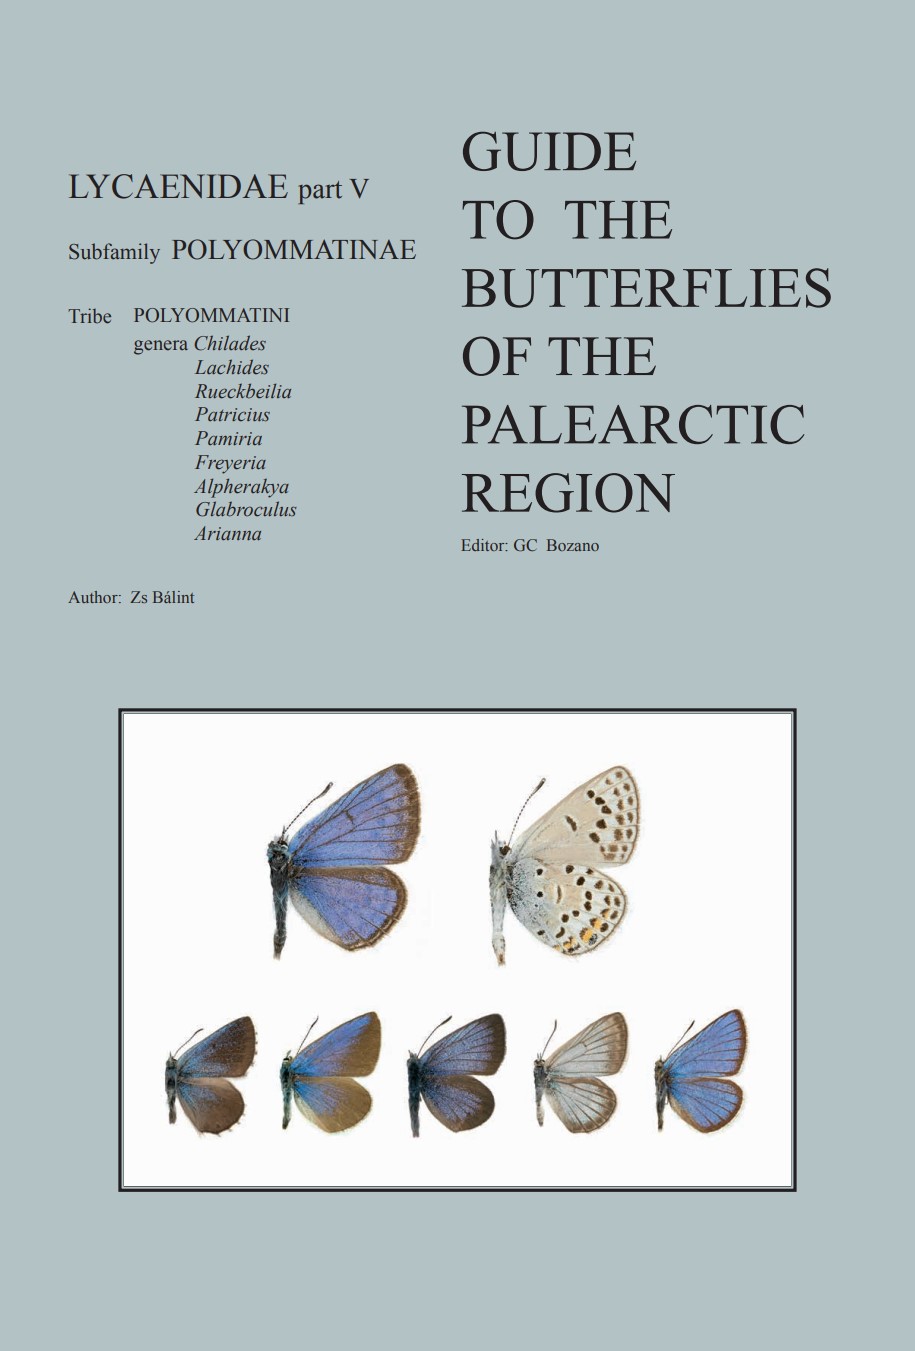 Balint, Z. - Guide to the Butterflies of the Palearctic Region: Lycaenidae 5: Tribe Polyommatini